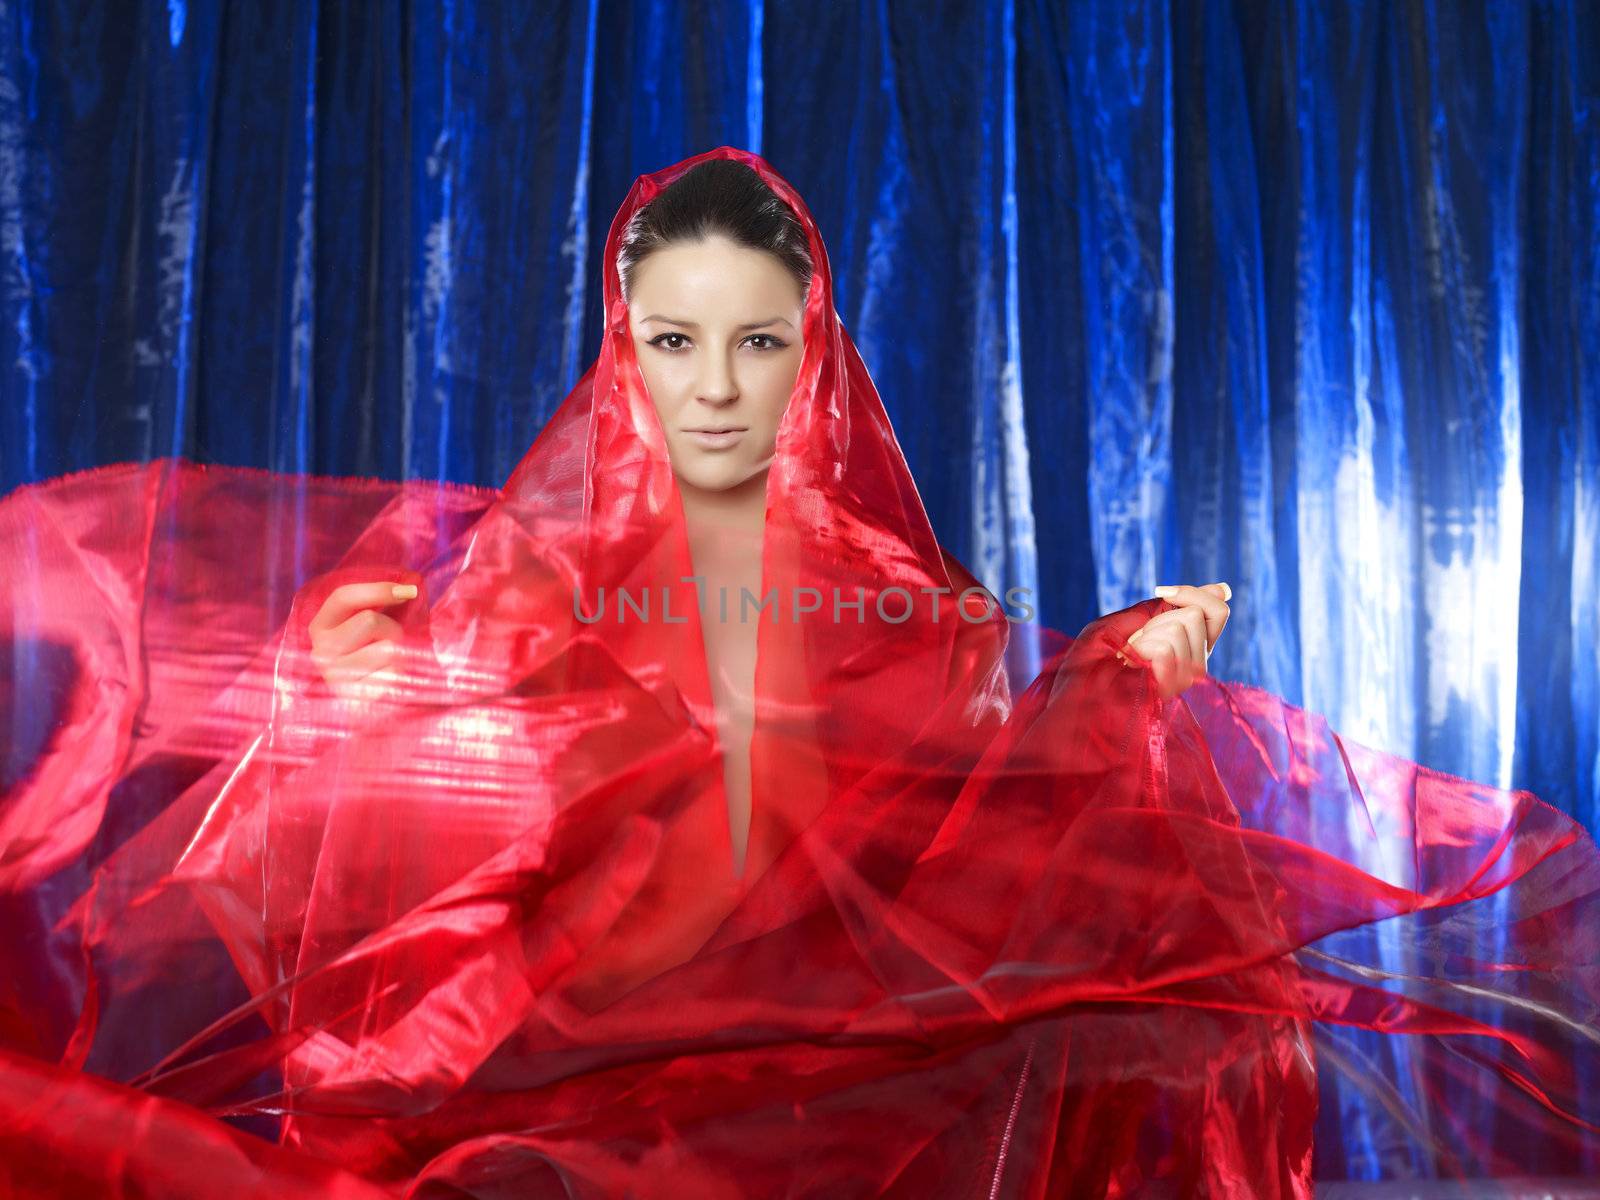 Amazing 40 mega pixels: Mystic and beautiful lady in red silk on blue background